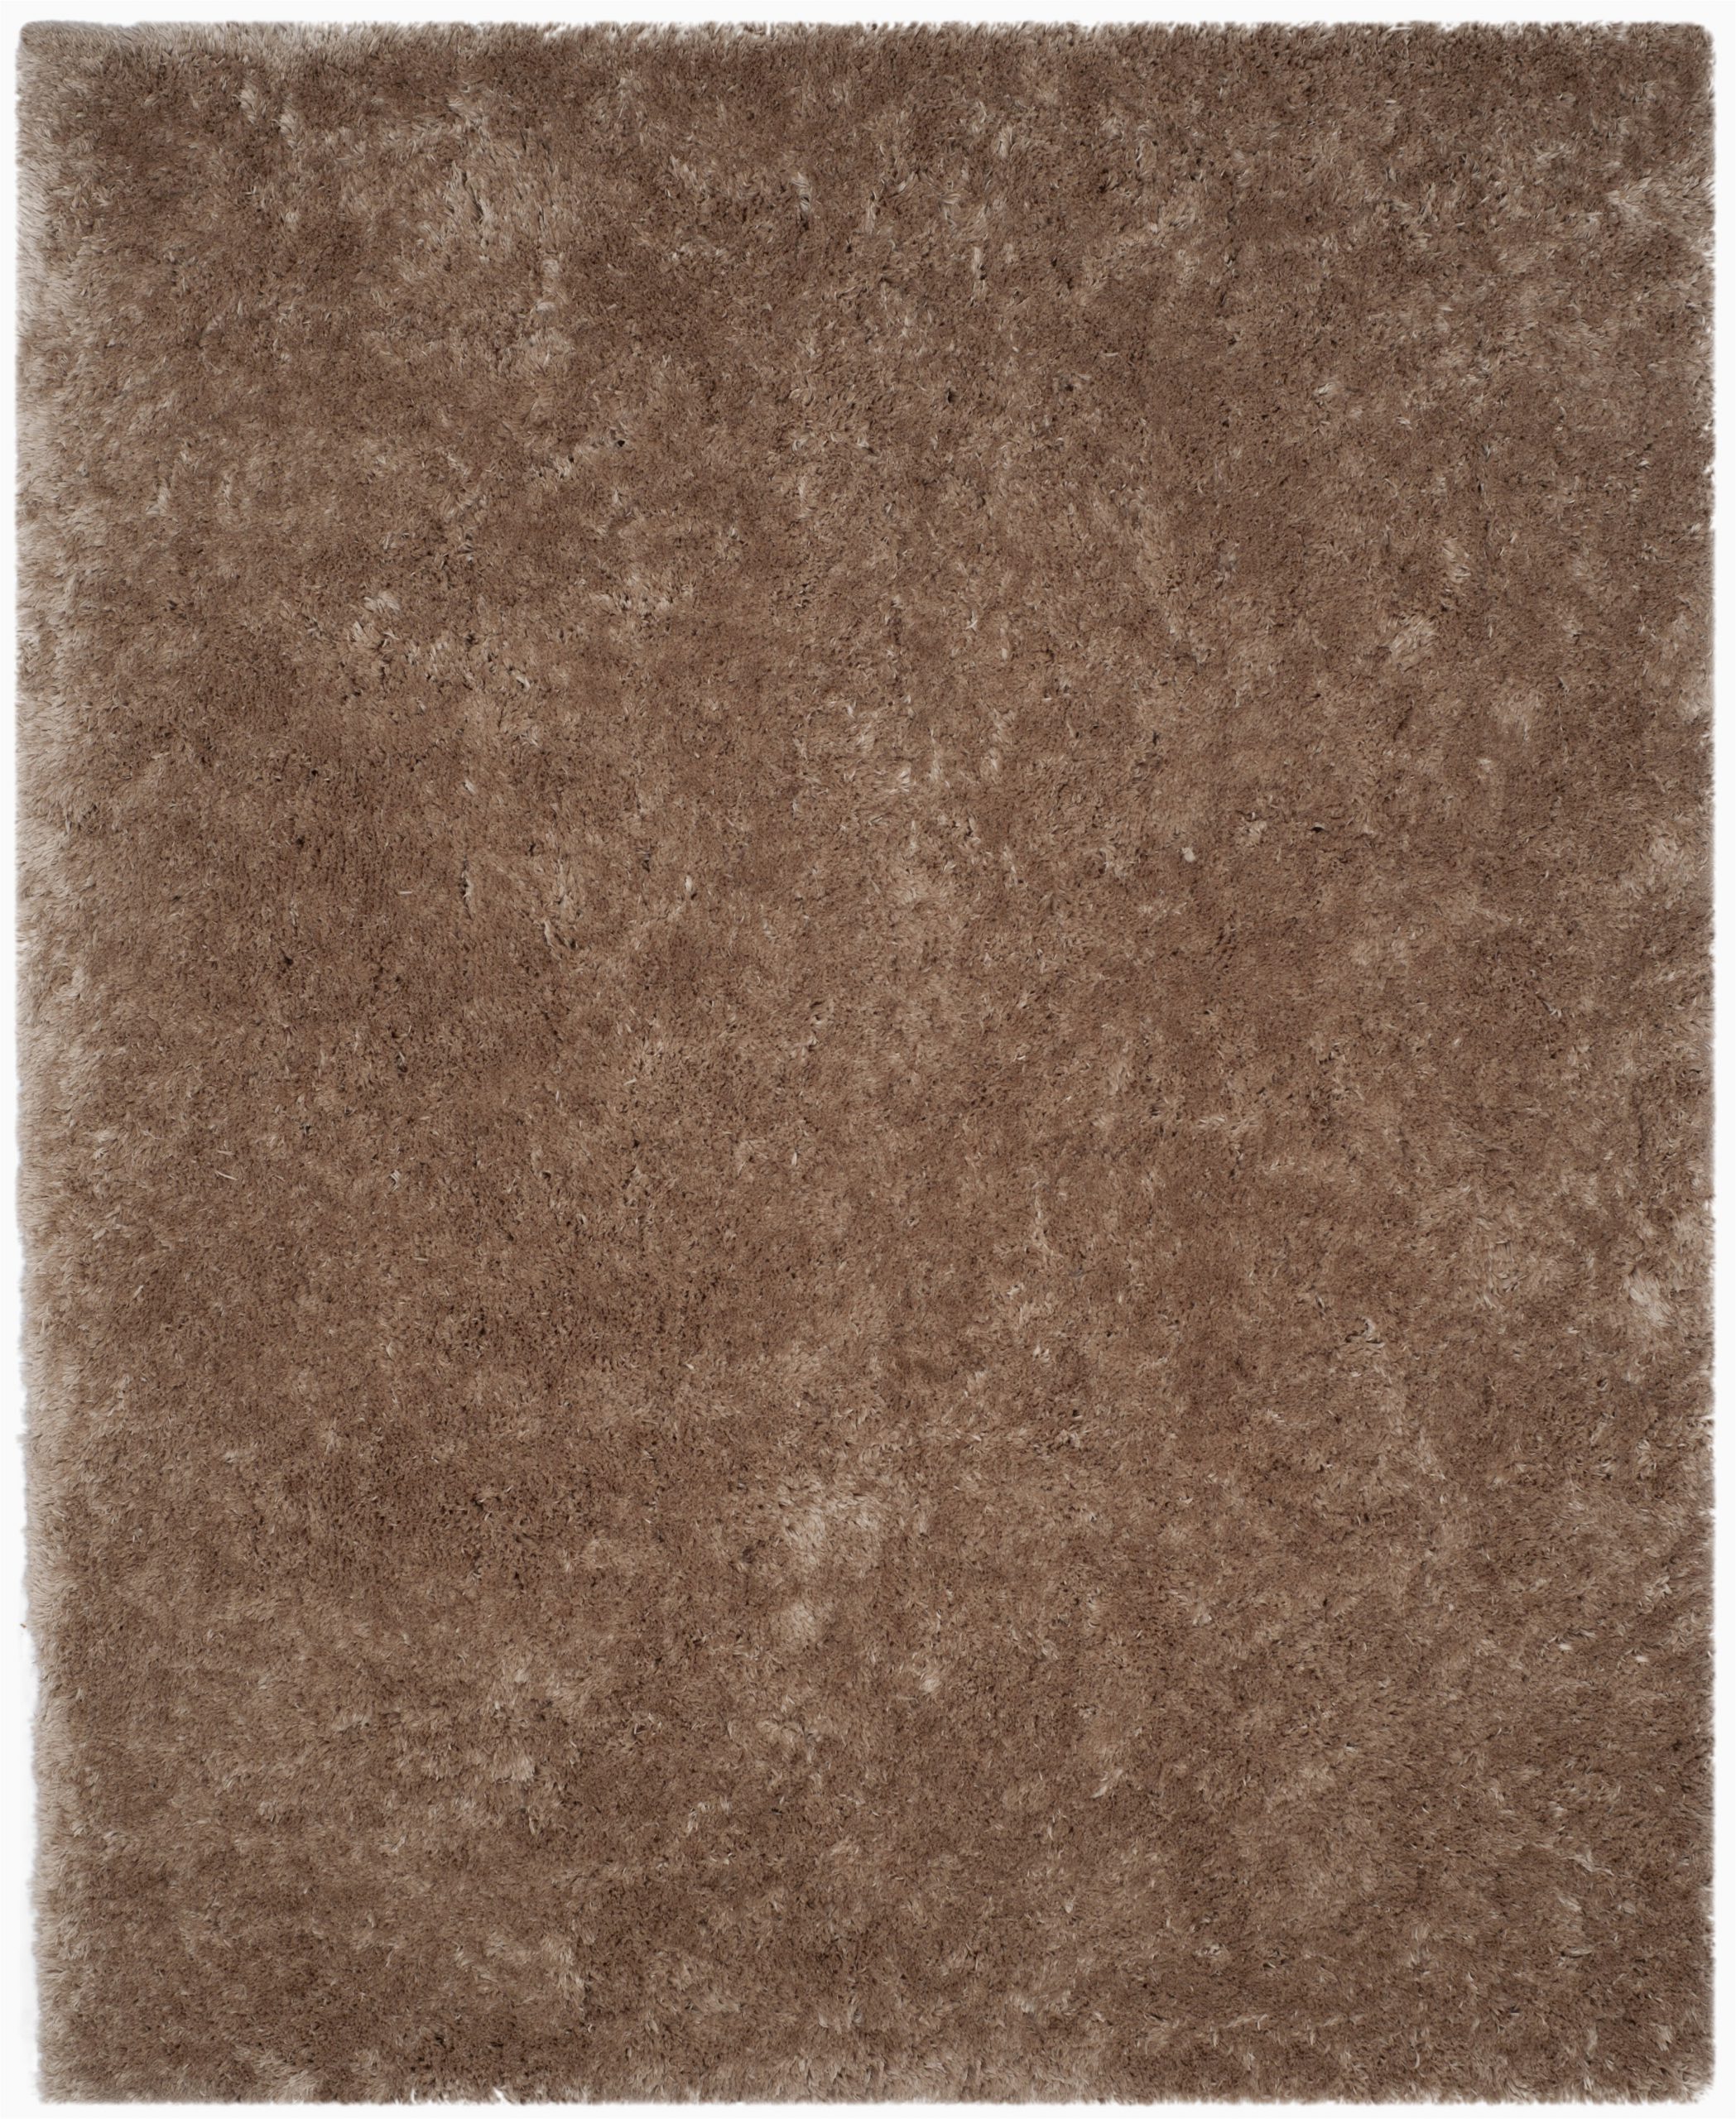 dax hand tufted taupe area rug